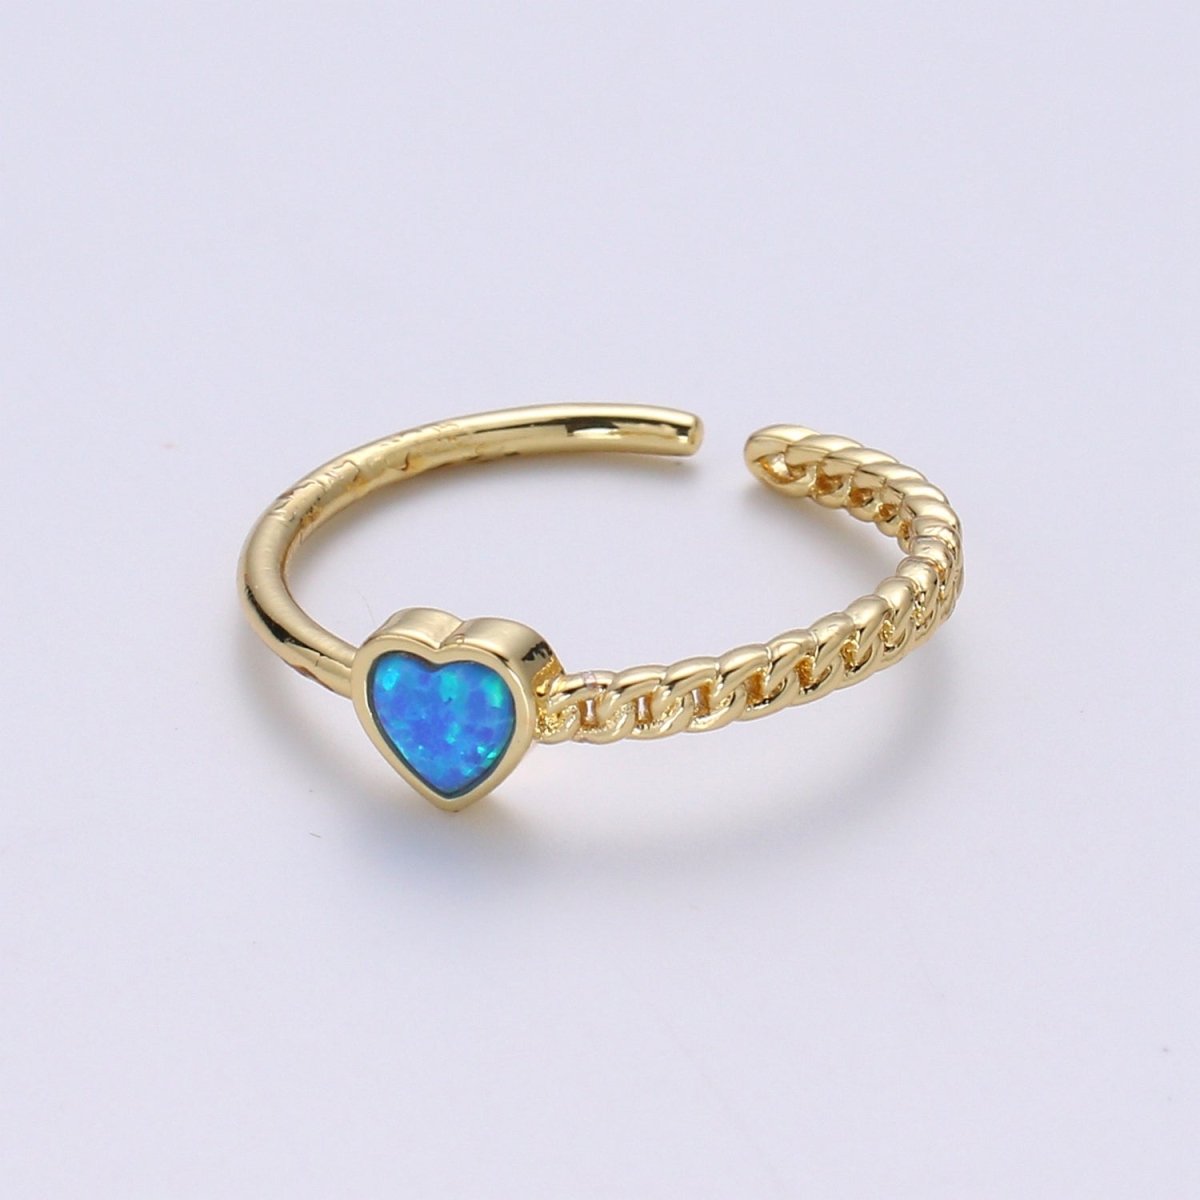 1pc 24K Gold Opal Simulated Ring, Opal Lab Pendant Charm Twisted Ring, Solitaire Heart Opal Lab Love Band For DIY Jewelry Ring R516 - DLUXCA